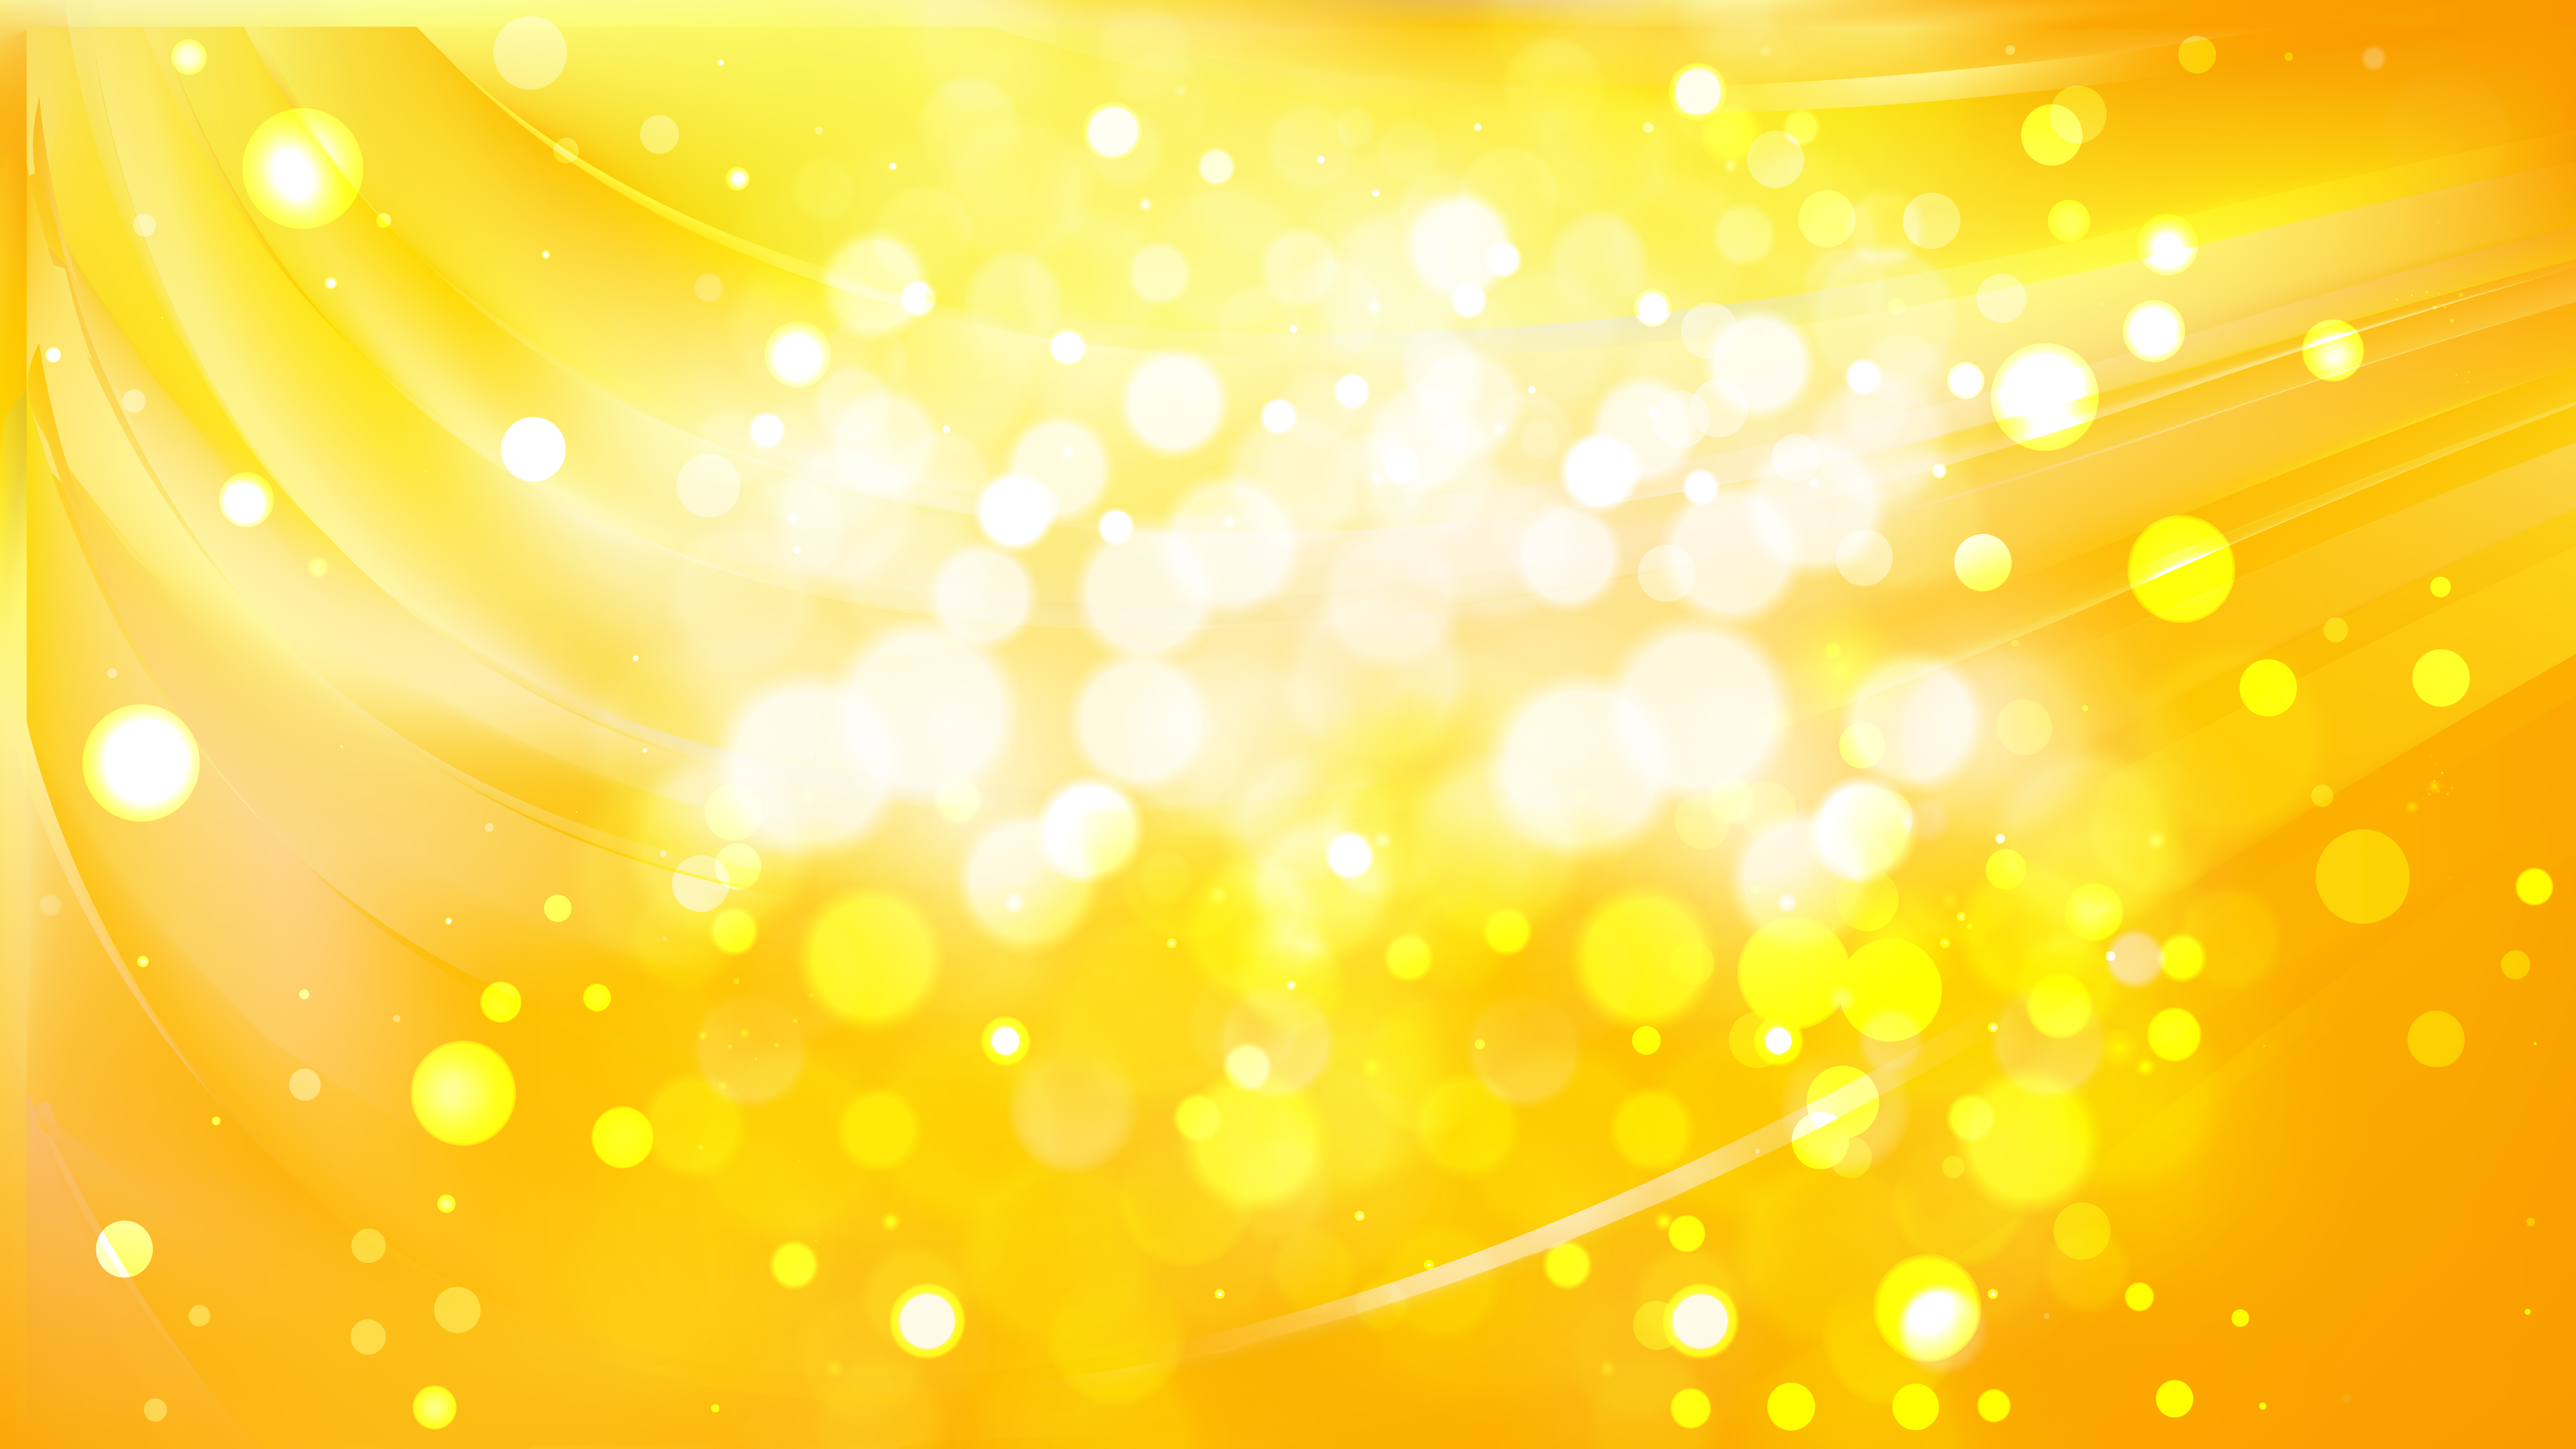 Free Abstract Orange and Yellow Bokeh Background Vector